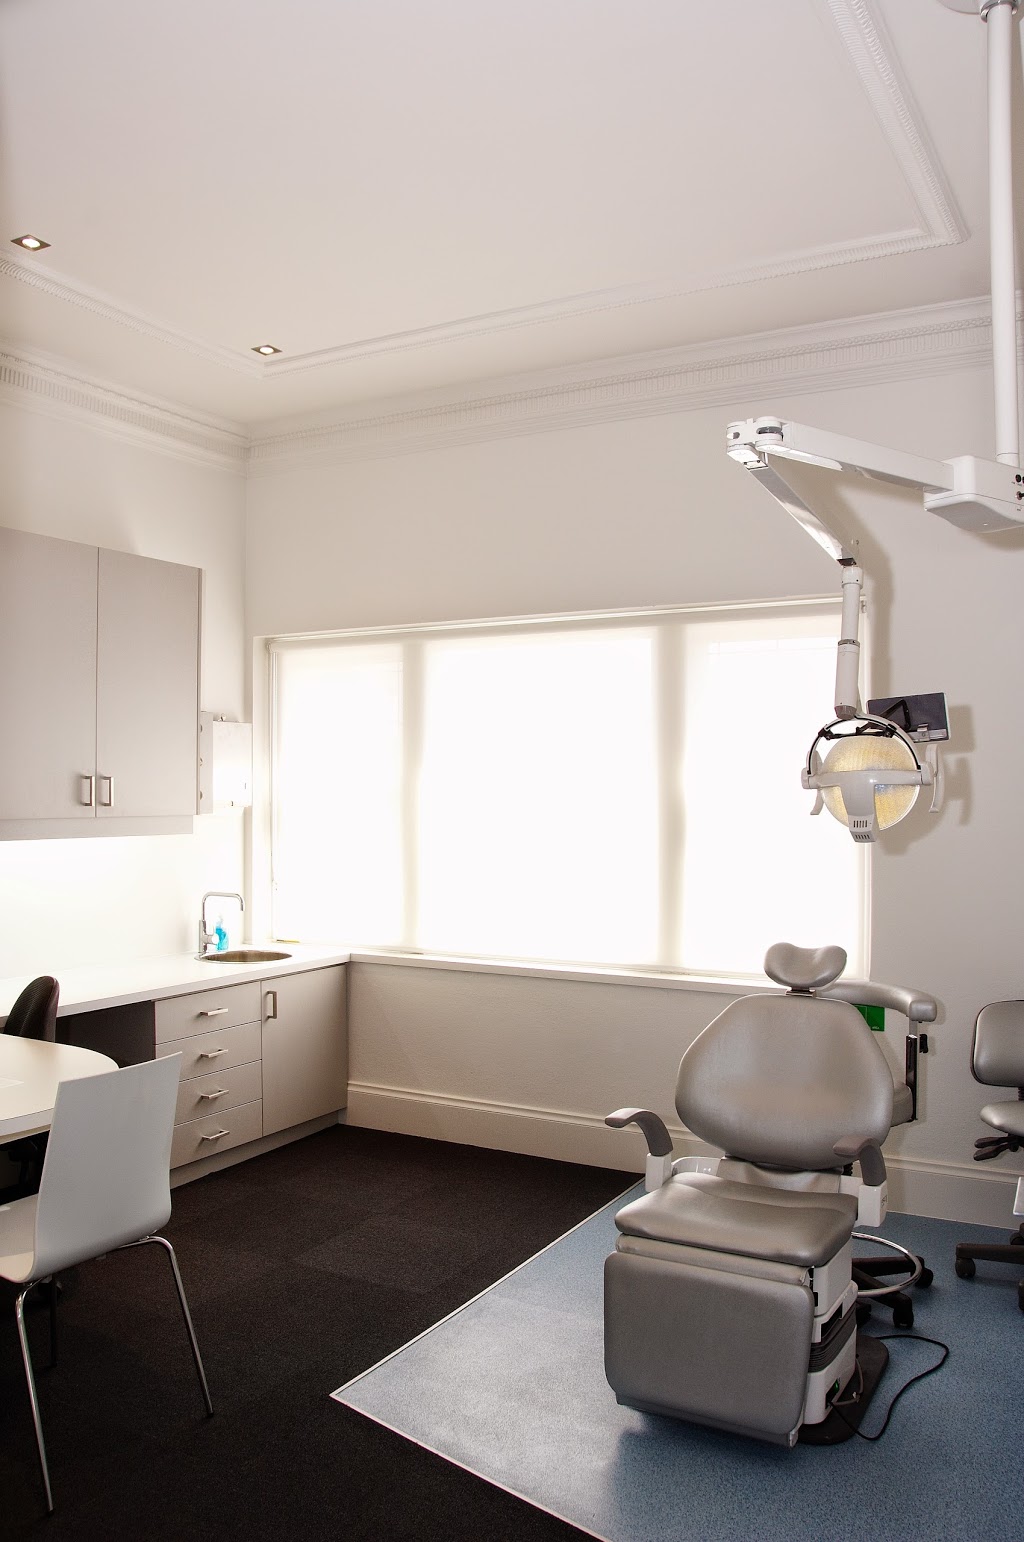 Sable and Pepicelli Orthodontists | dentist | 1286 Dandenong Rd, Murrumbeena VIC 3163, Australia | 0395683100 OR +61 3 9568 3100